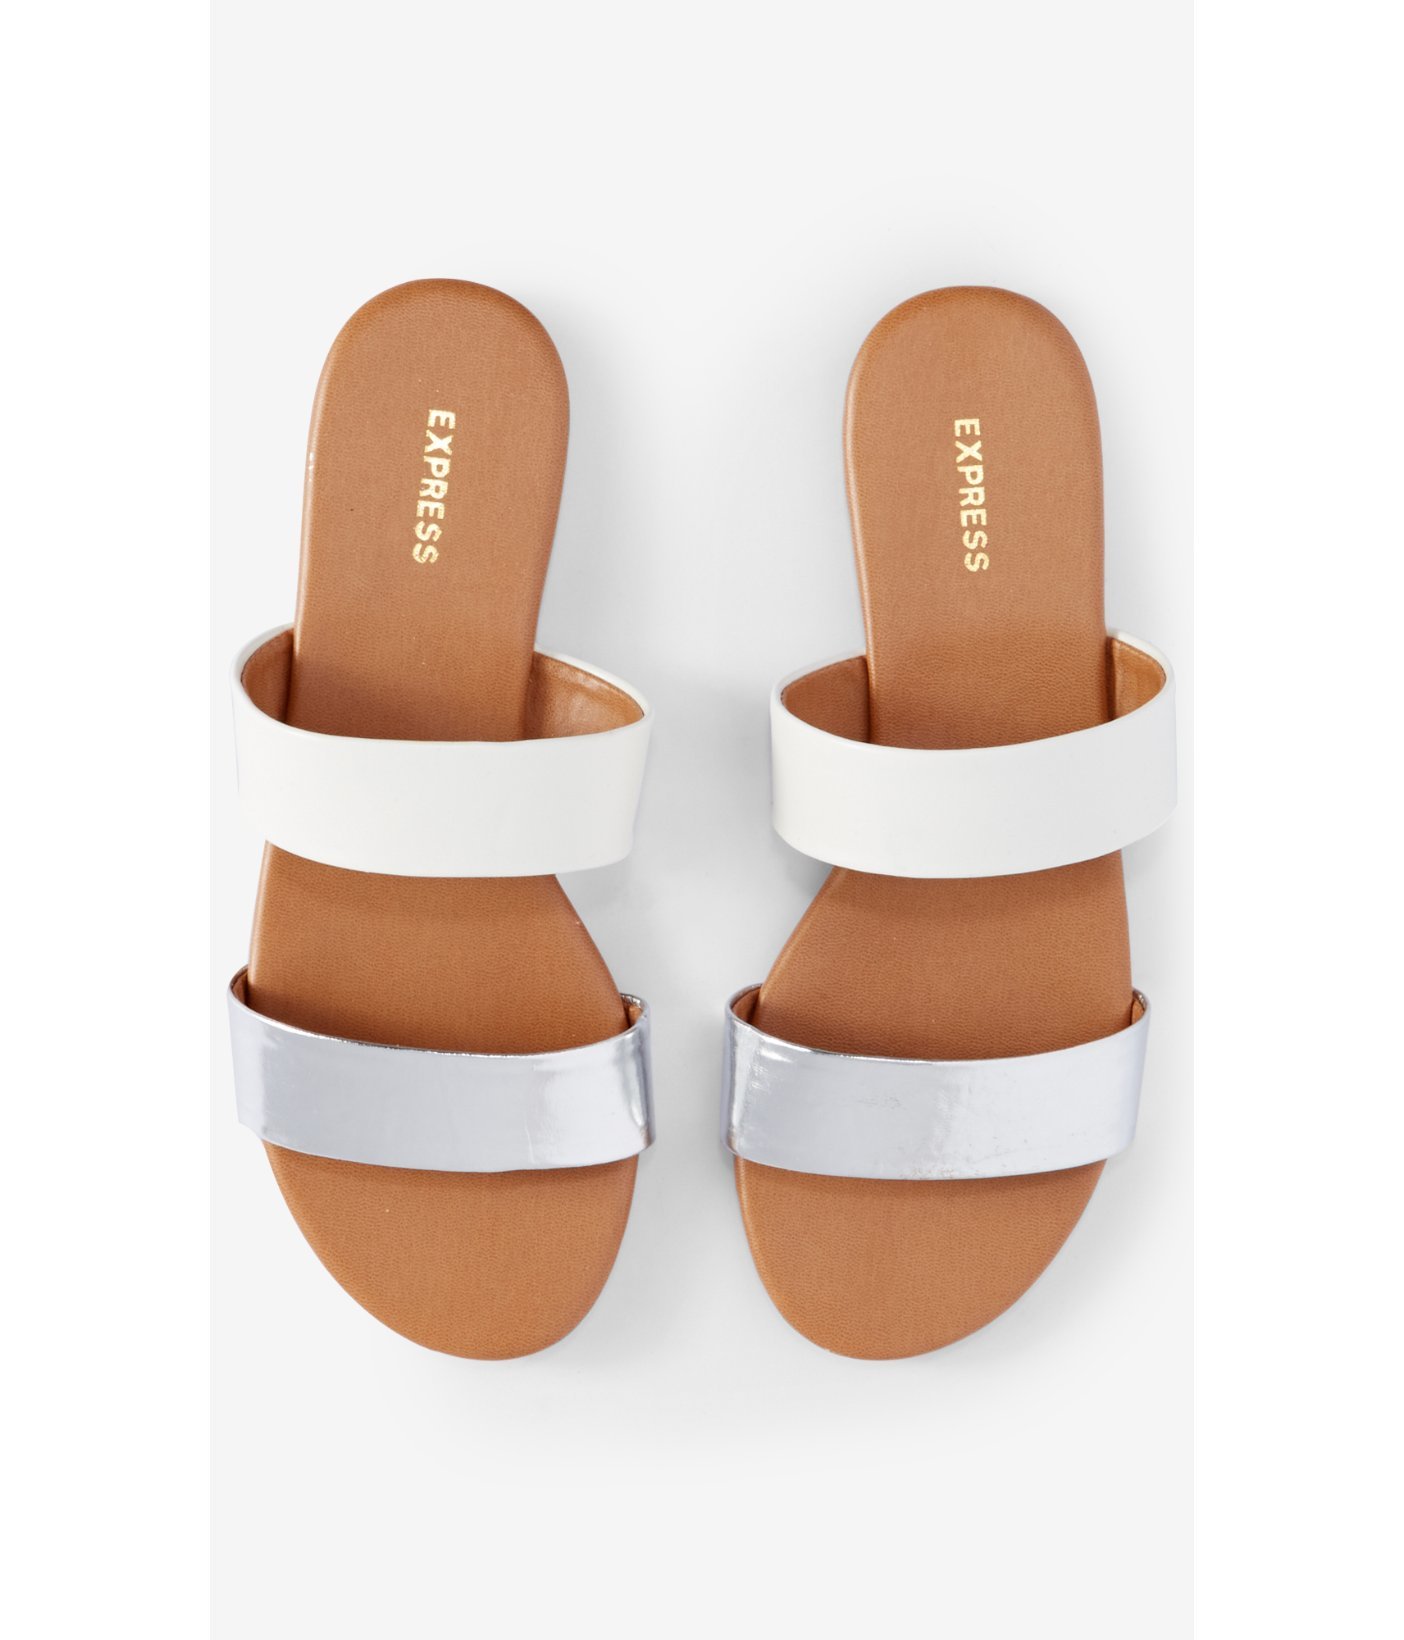 Express Two Strap Slide Sandals in 